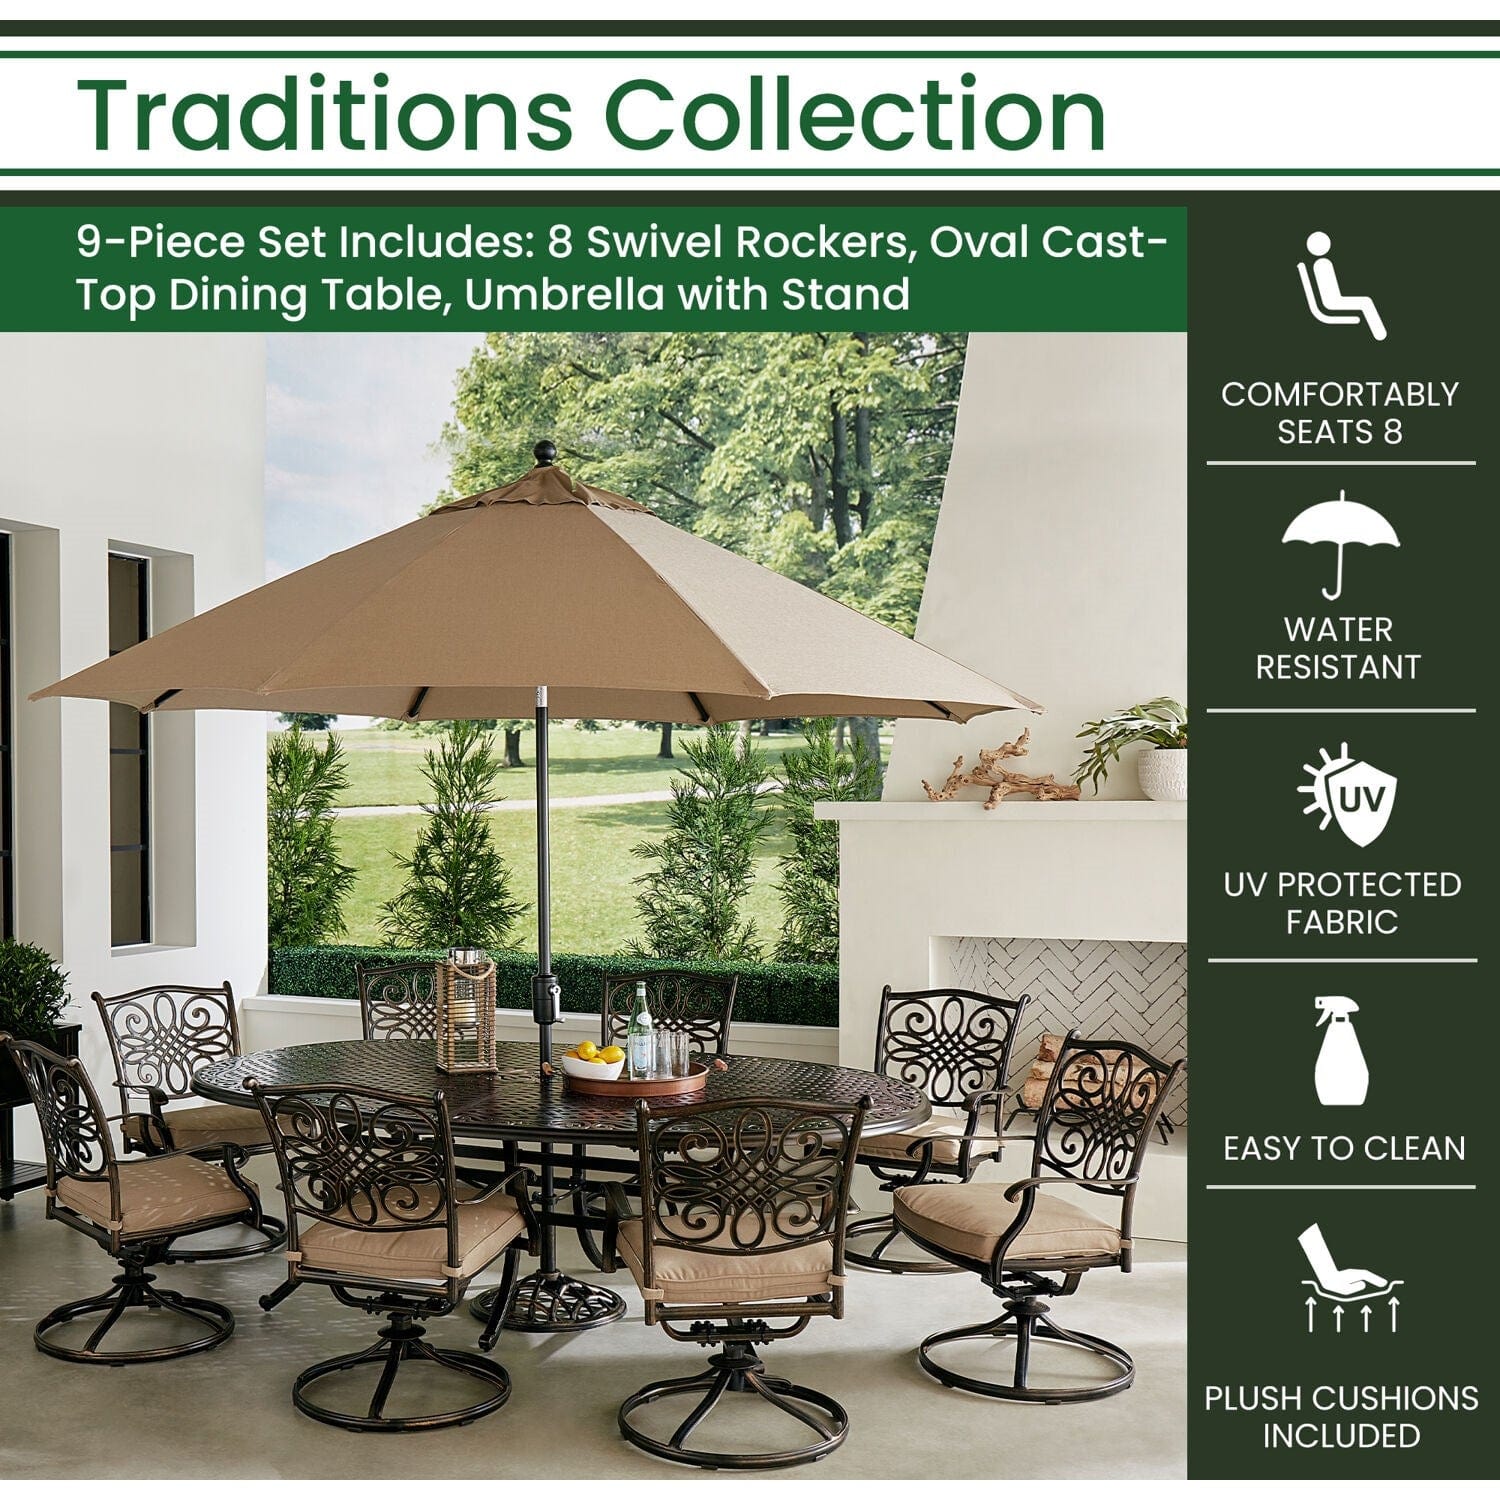 Hanover Outdoor Dining Set Hanover Traditions 9-Piece Dining Set in Tan with 8 Swivel Rockers, 95-in. x 60-in. Oval Cast-Top Table, Umbrella and Umbrella Stand